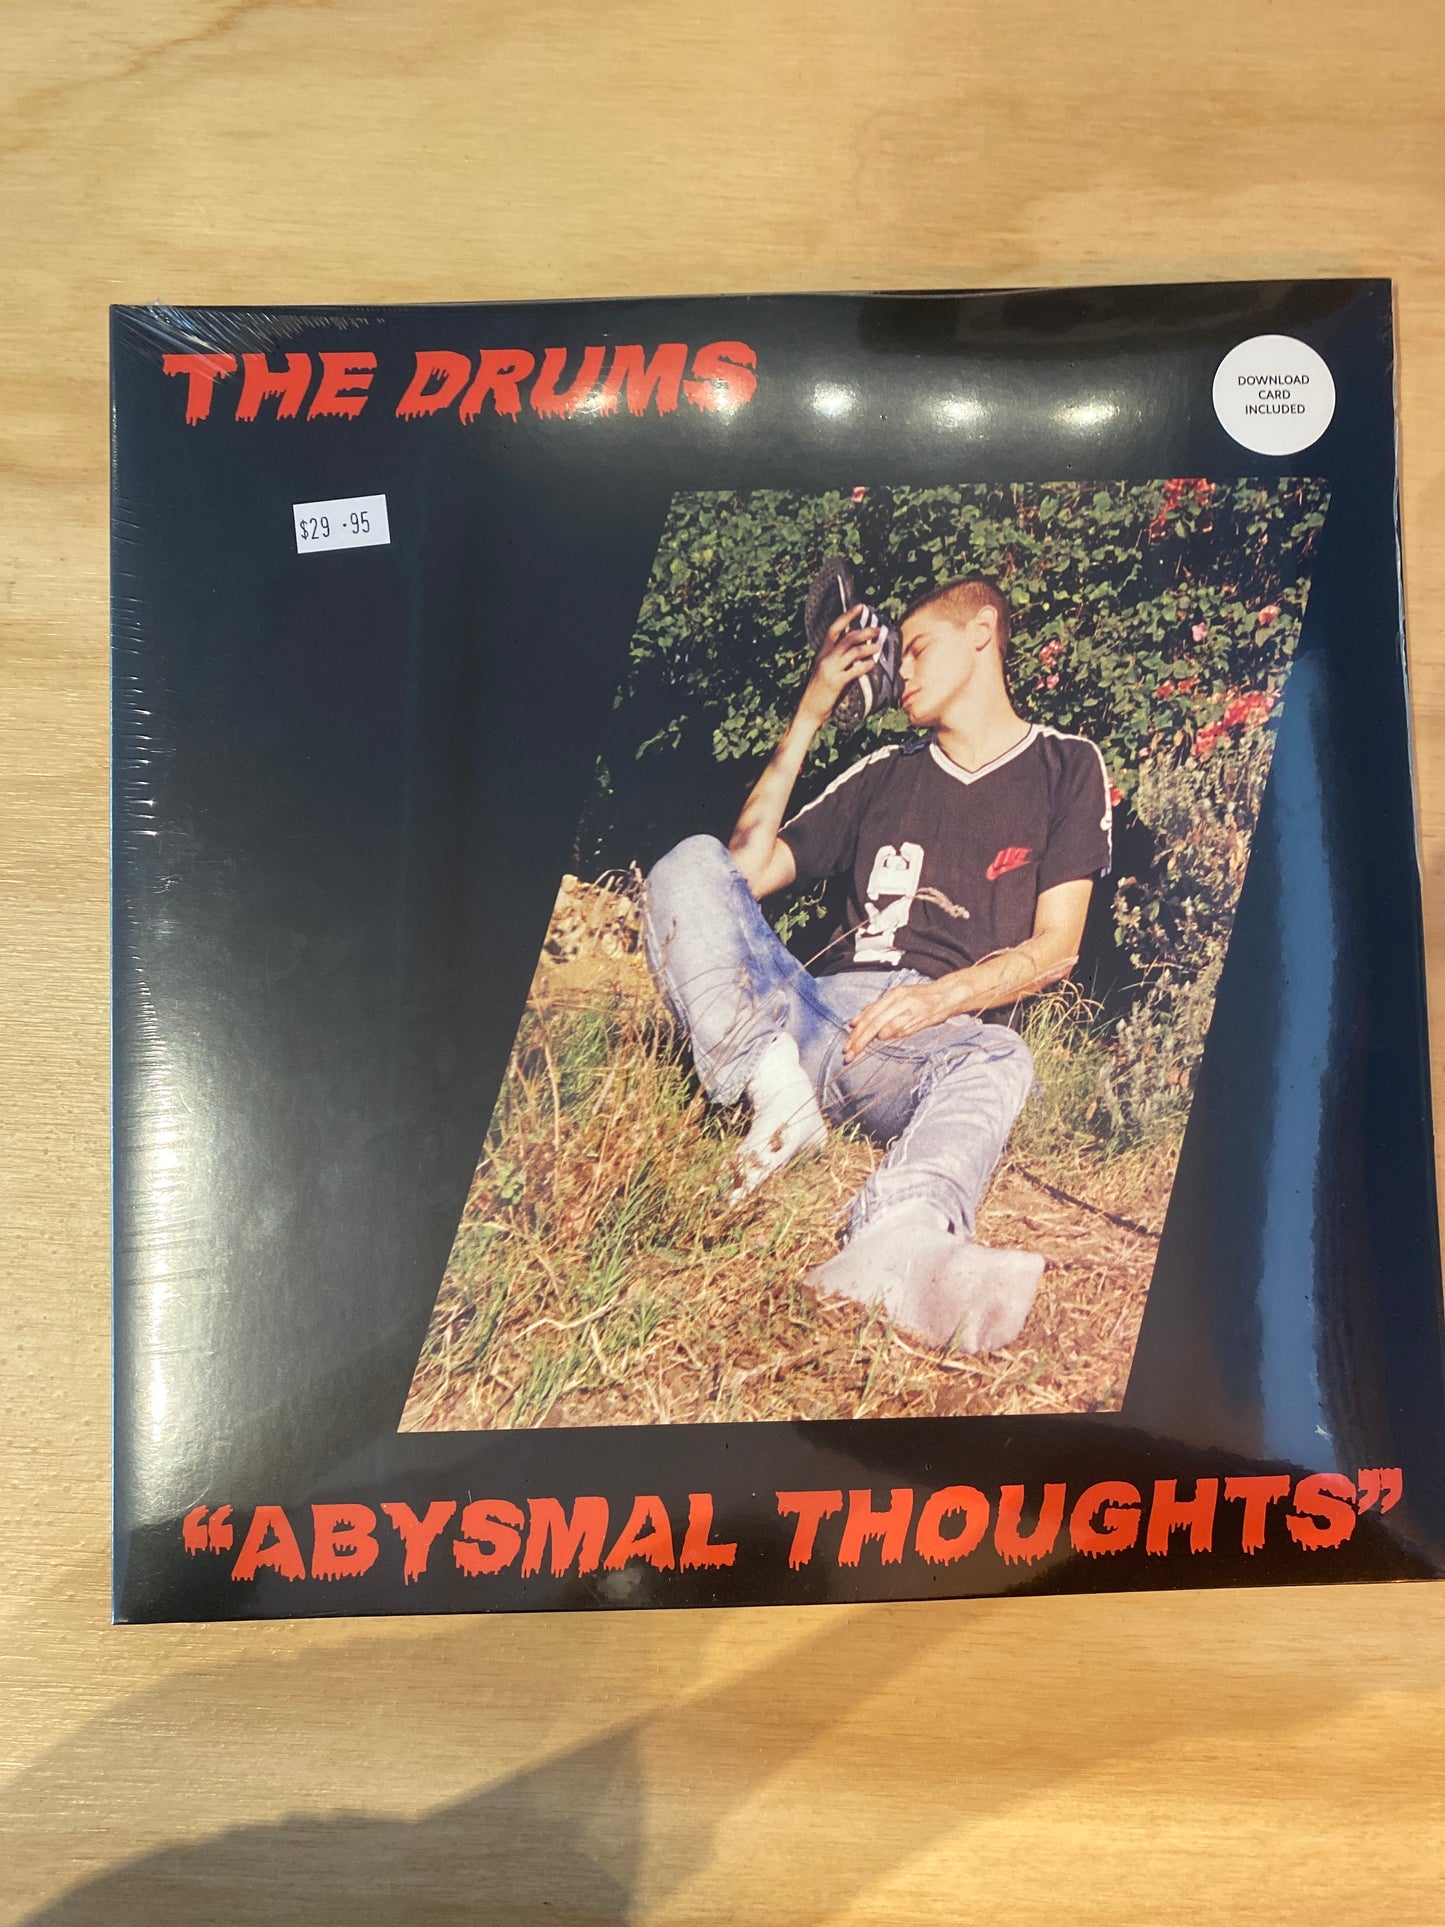 The Drums - Abysmal Thoughts - Vinyl LP